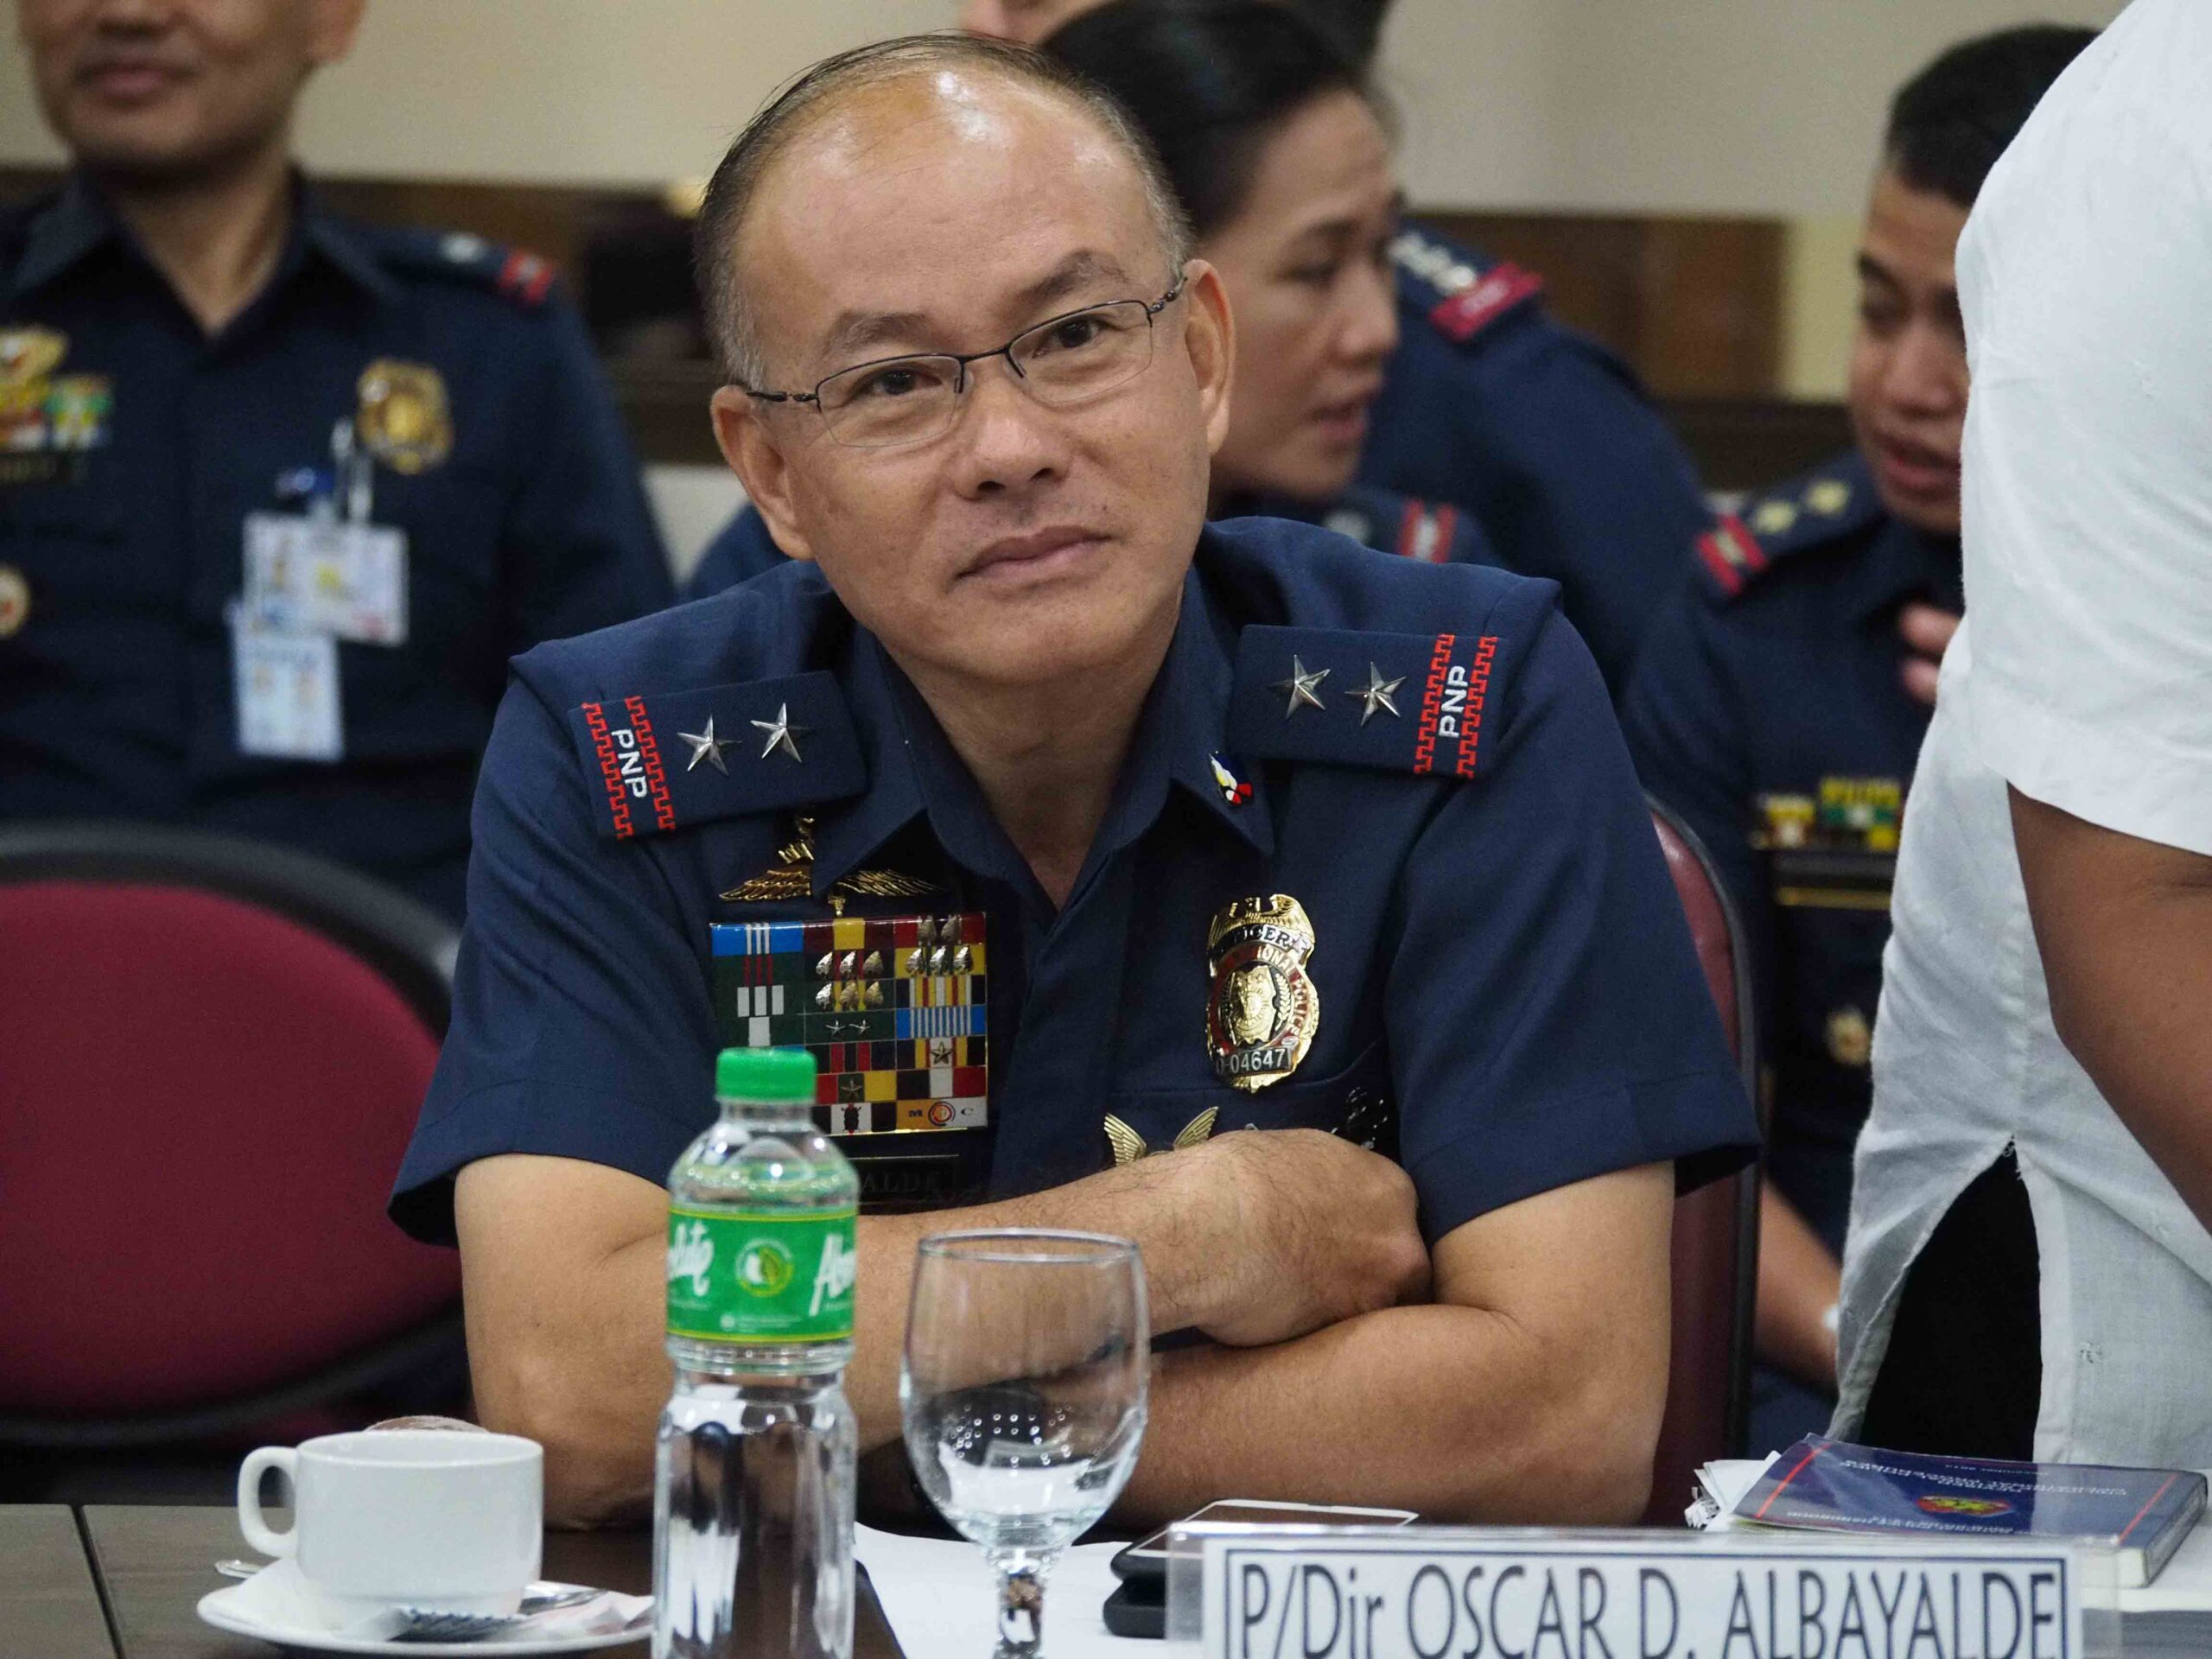 Albayalde to retain Oplan Tokhang when he becomes PNP chief